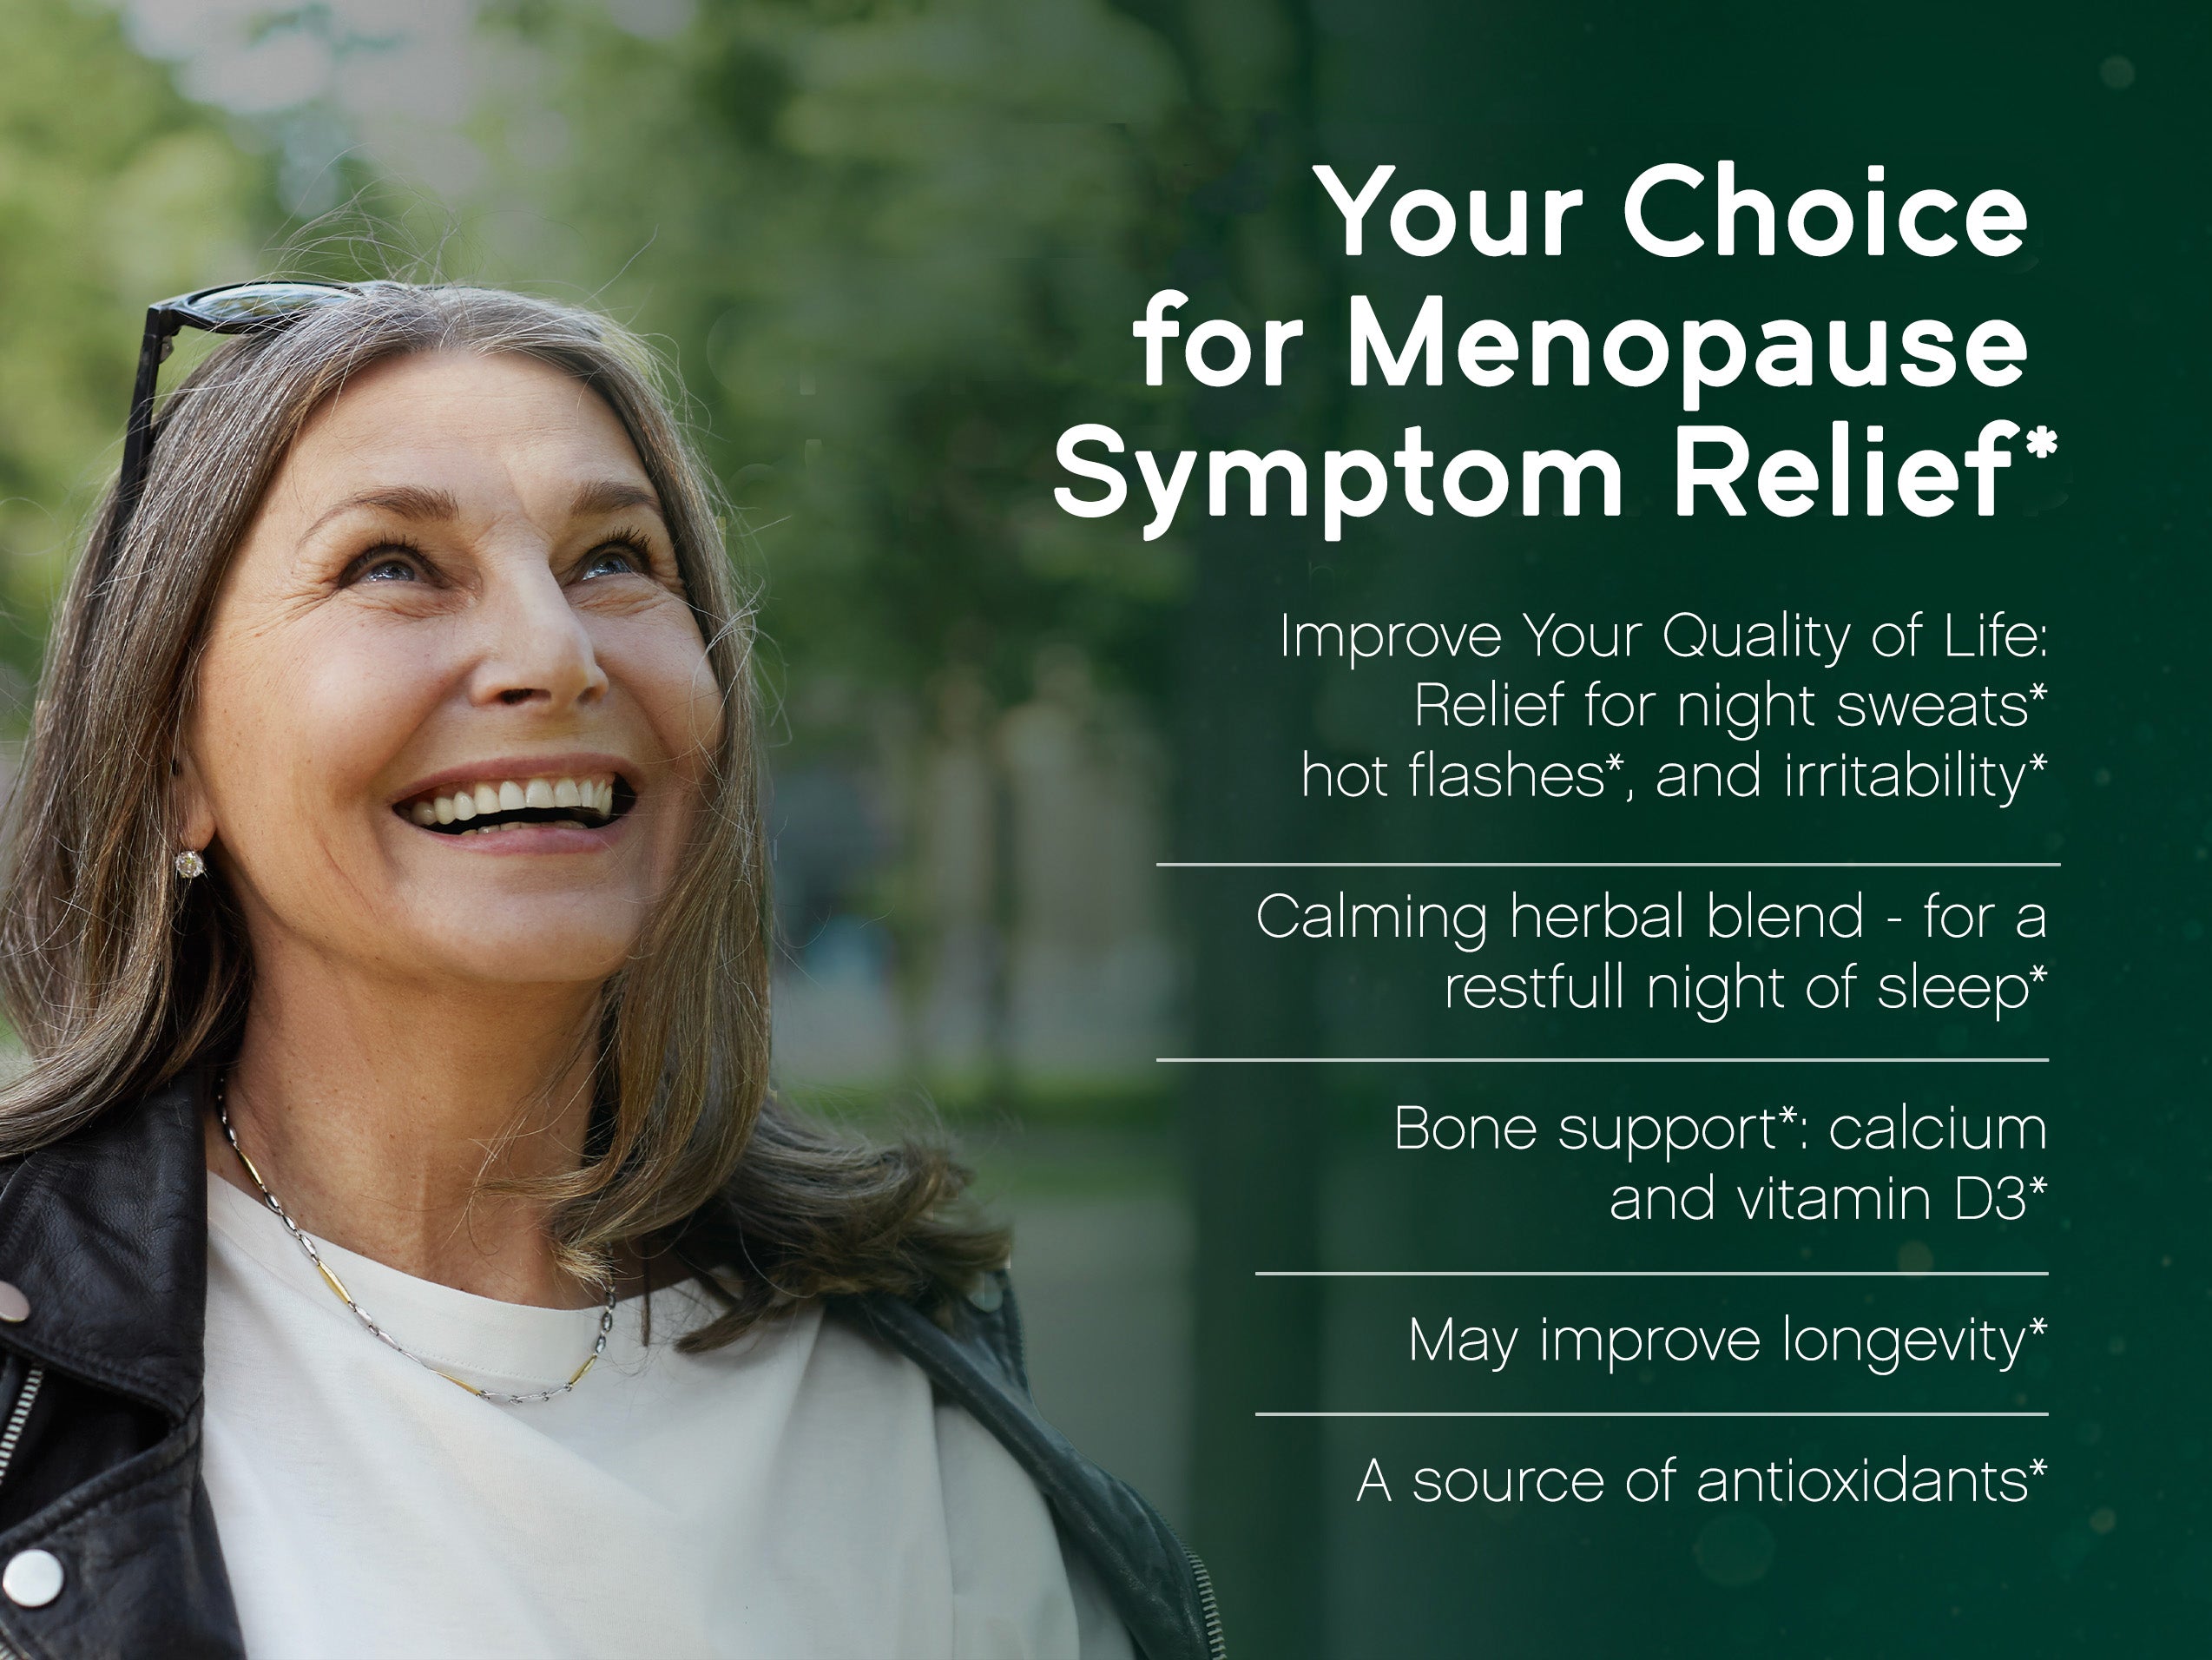 YOUR CHOICE FOR MENOPAUSE SYMPTOM RELIEF